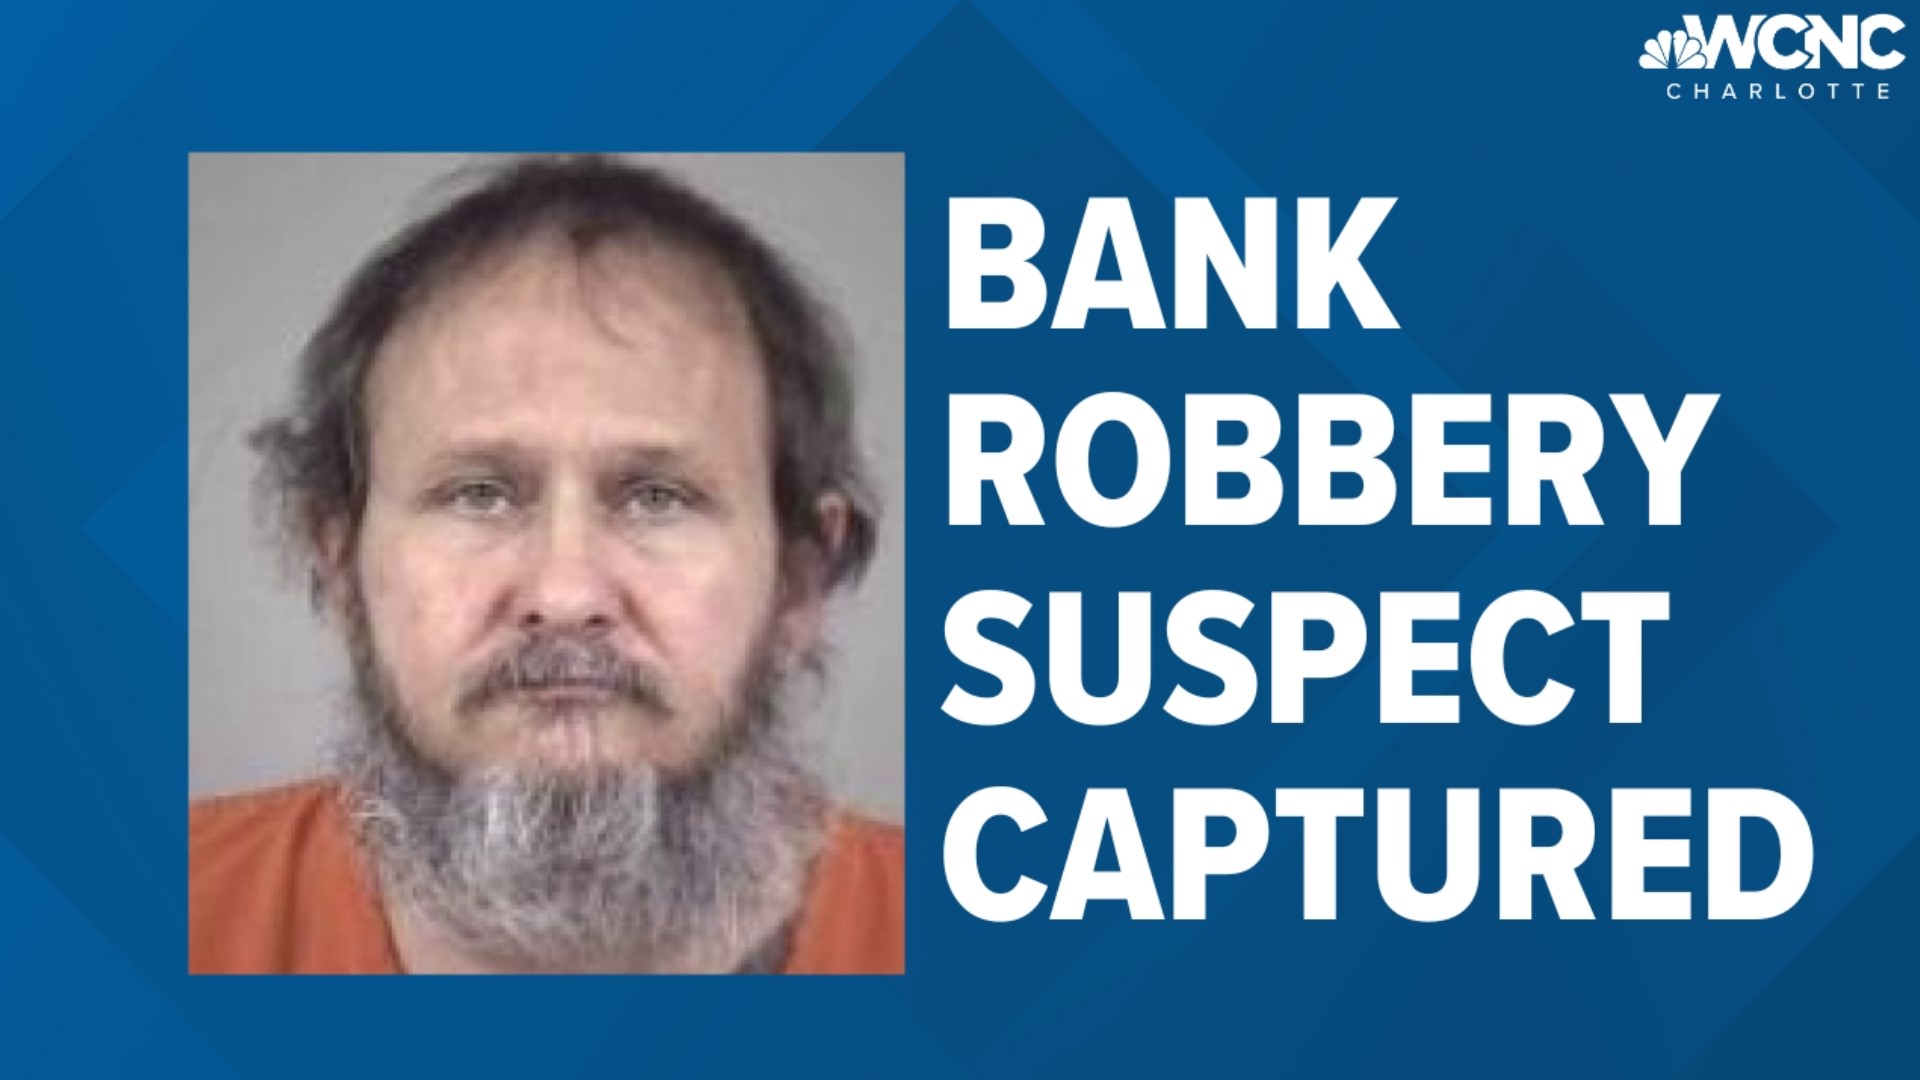 A Concord man is linked to multiple robberies across North Carolina.